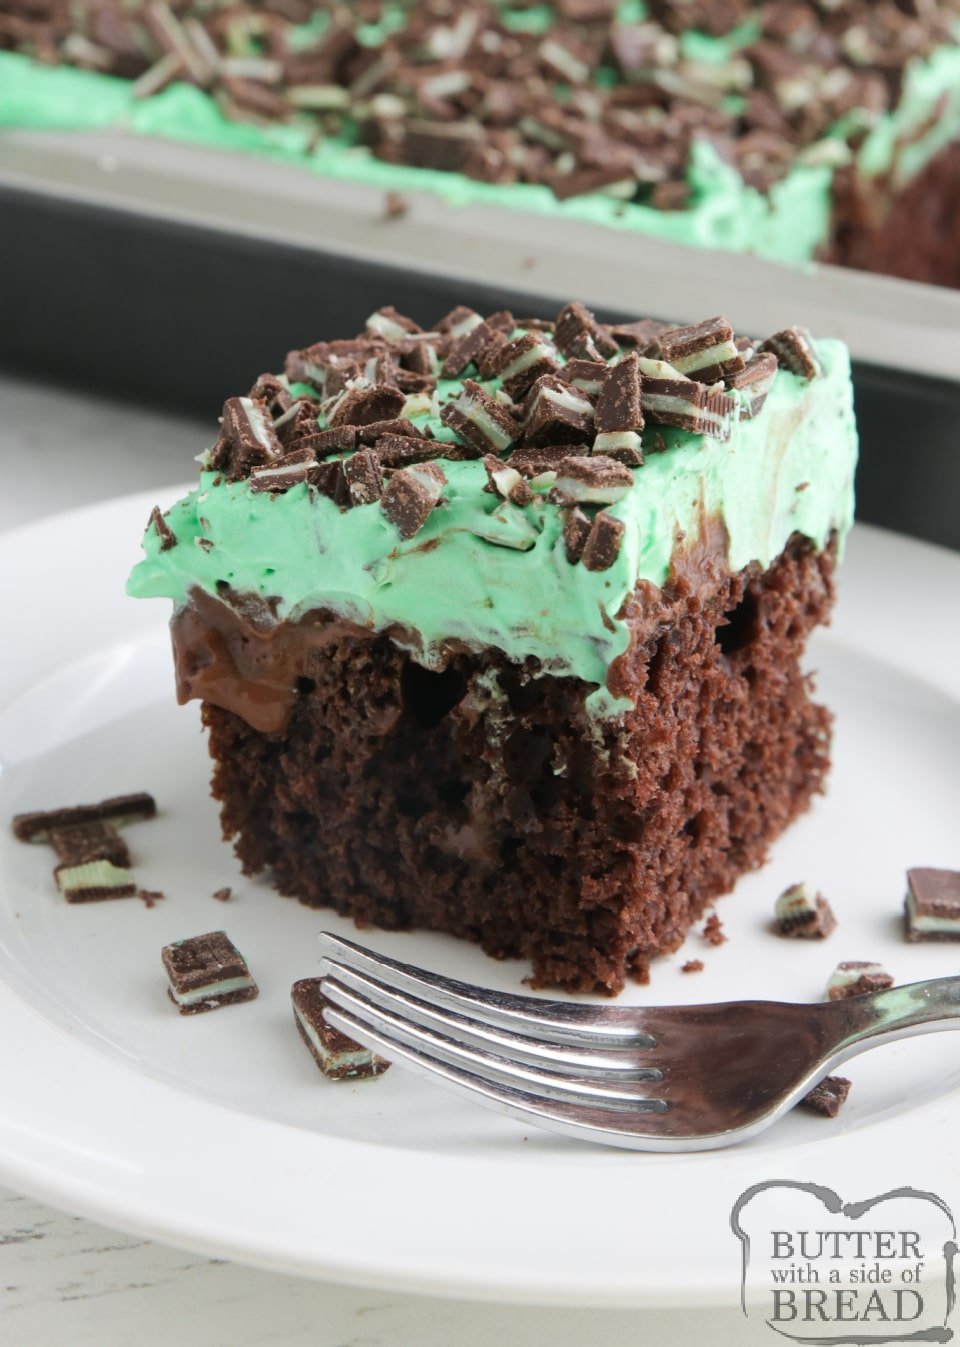 Mint Chocolate Poke Cake made with a cake mix, hot fudge, chocolate pudding and a mint flavored whipped cream topped with chopped Andes mints. Decadent but easy chocolate cake recipe!